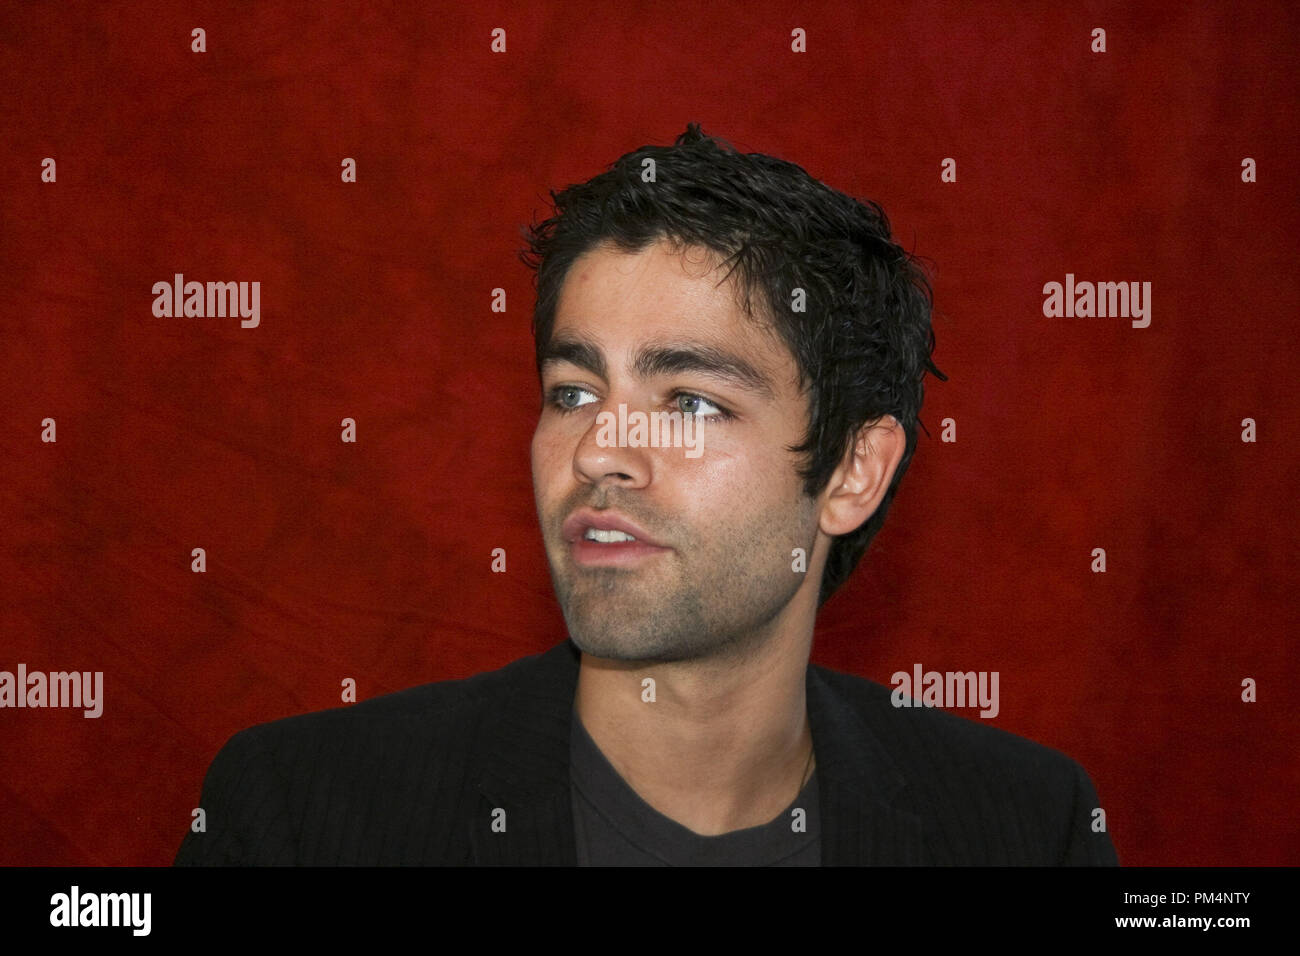 Adrian Grenier 'Teenage Paparazzo' Portrait Session, August 16, 2010.  Reproduction by American tabloids is absolutely forbidden. File Reference # 30445 009JRC  For Editorial Use Only -  All Rights Reserved Stock Photo